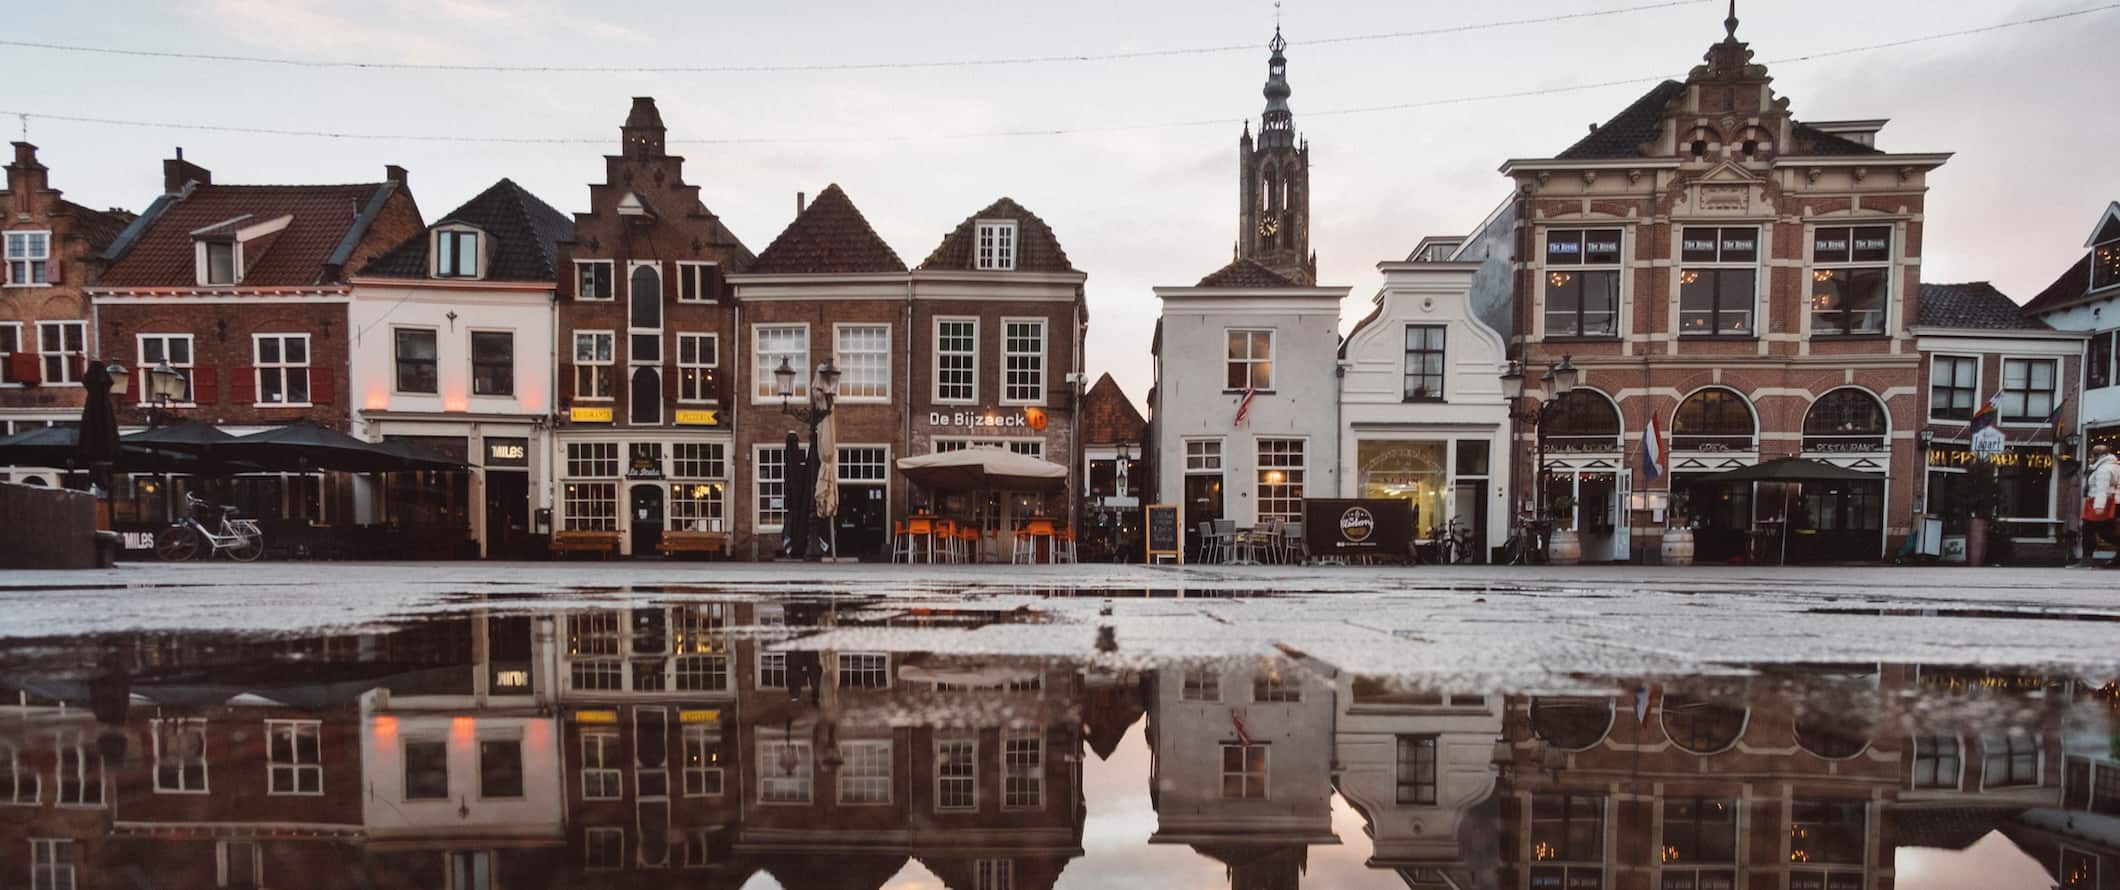 A rainy day in Utrecht, Netherlands featuring a row of old historic buildings